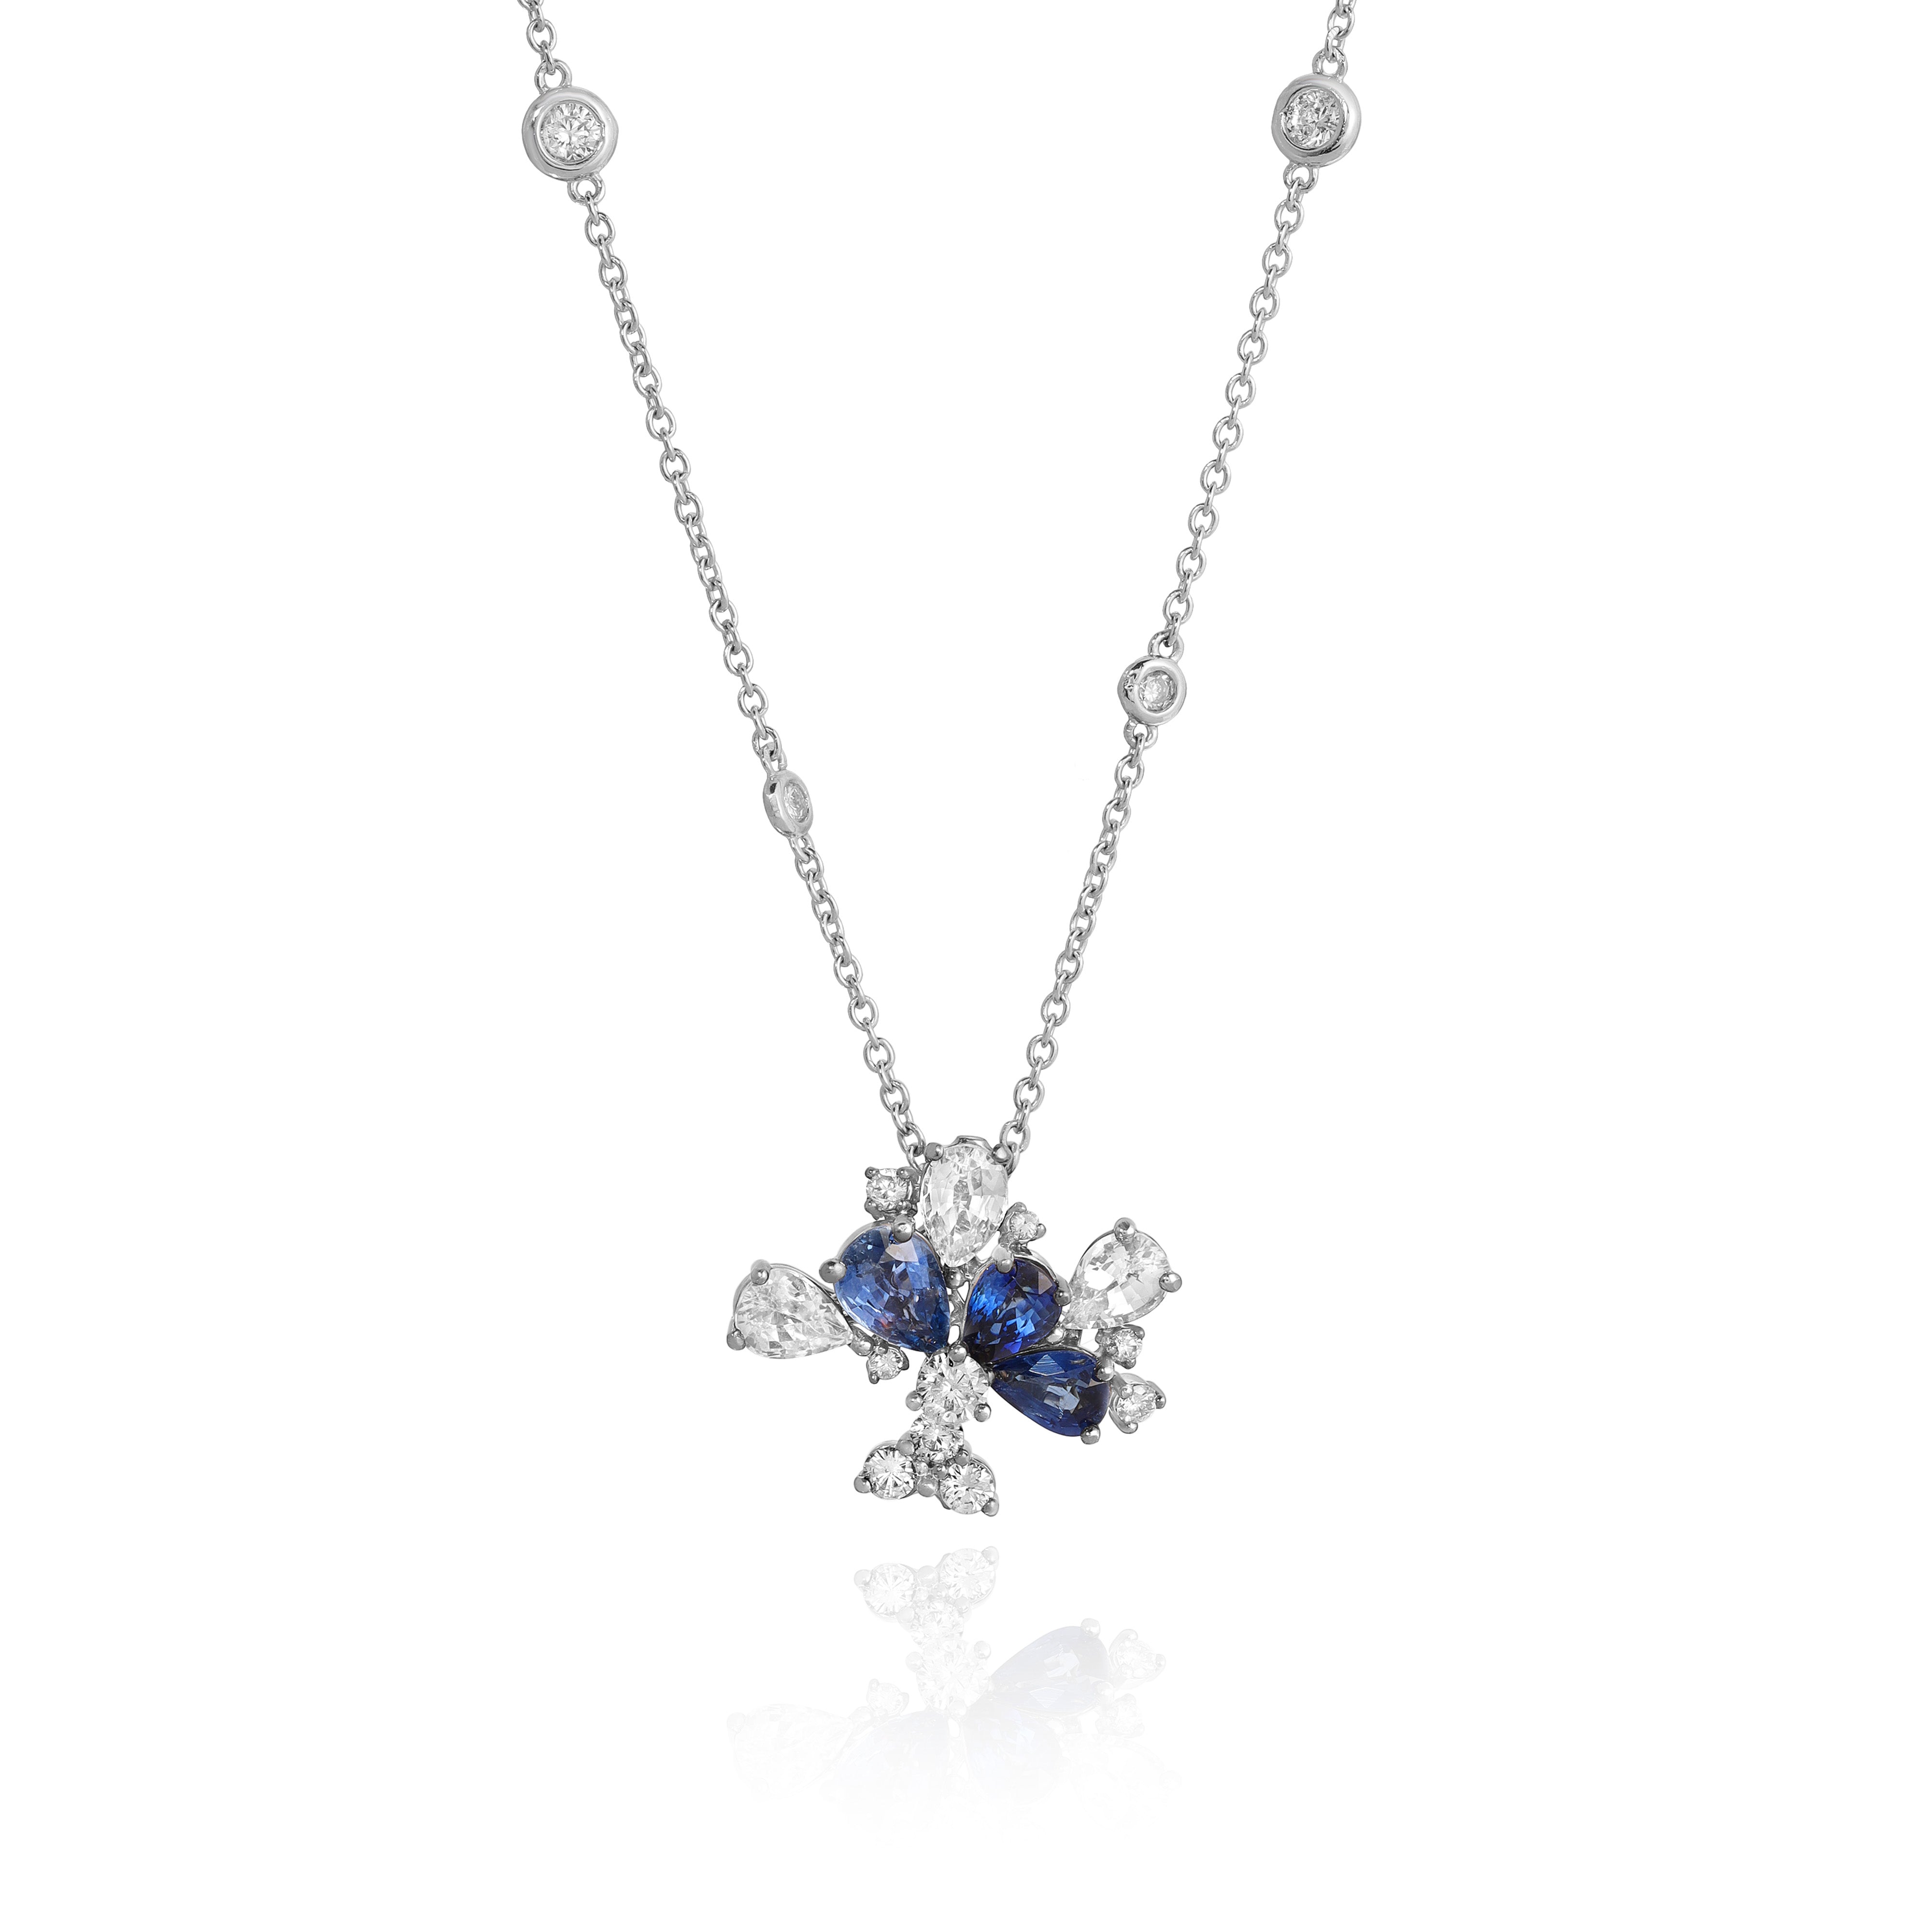 White Gold Necklace with Blue and White Sapphires, and Diamonds, Medium